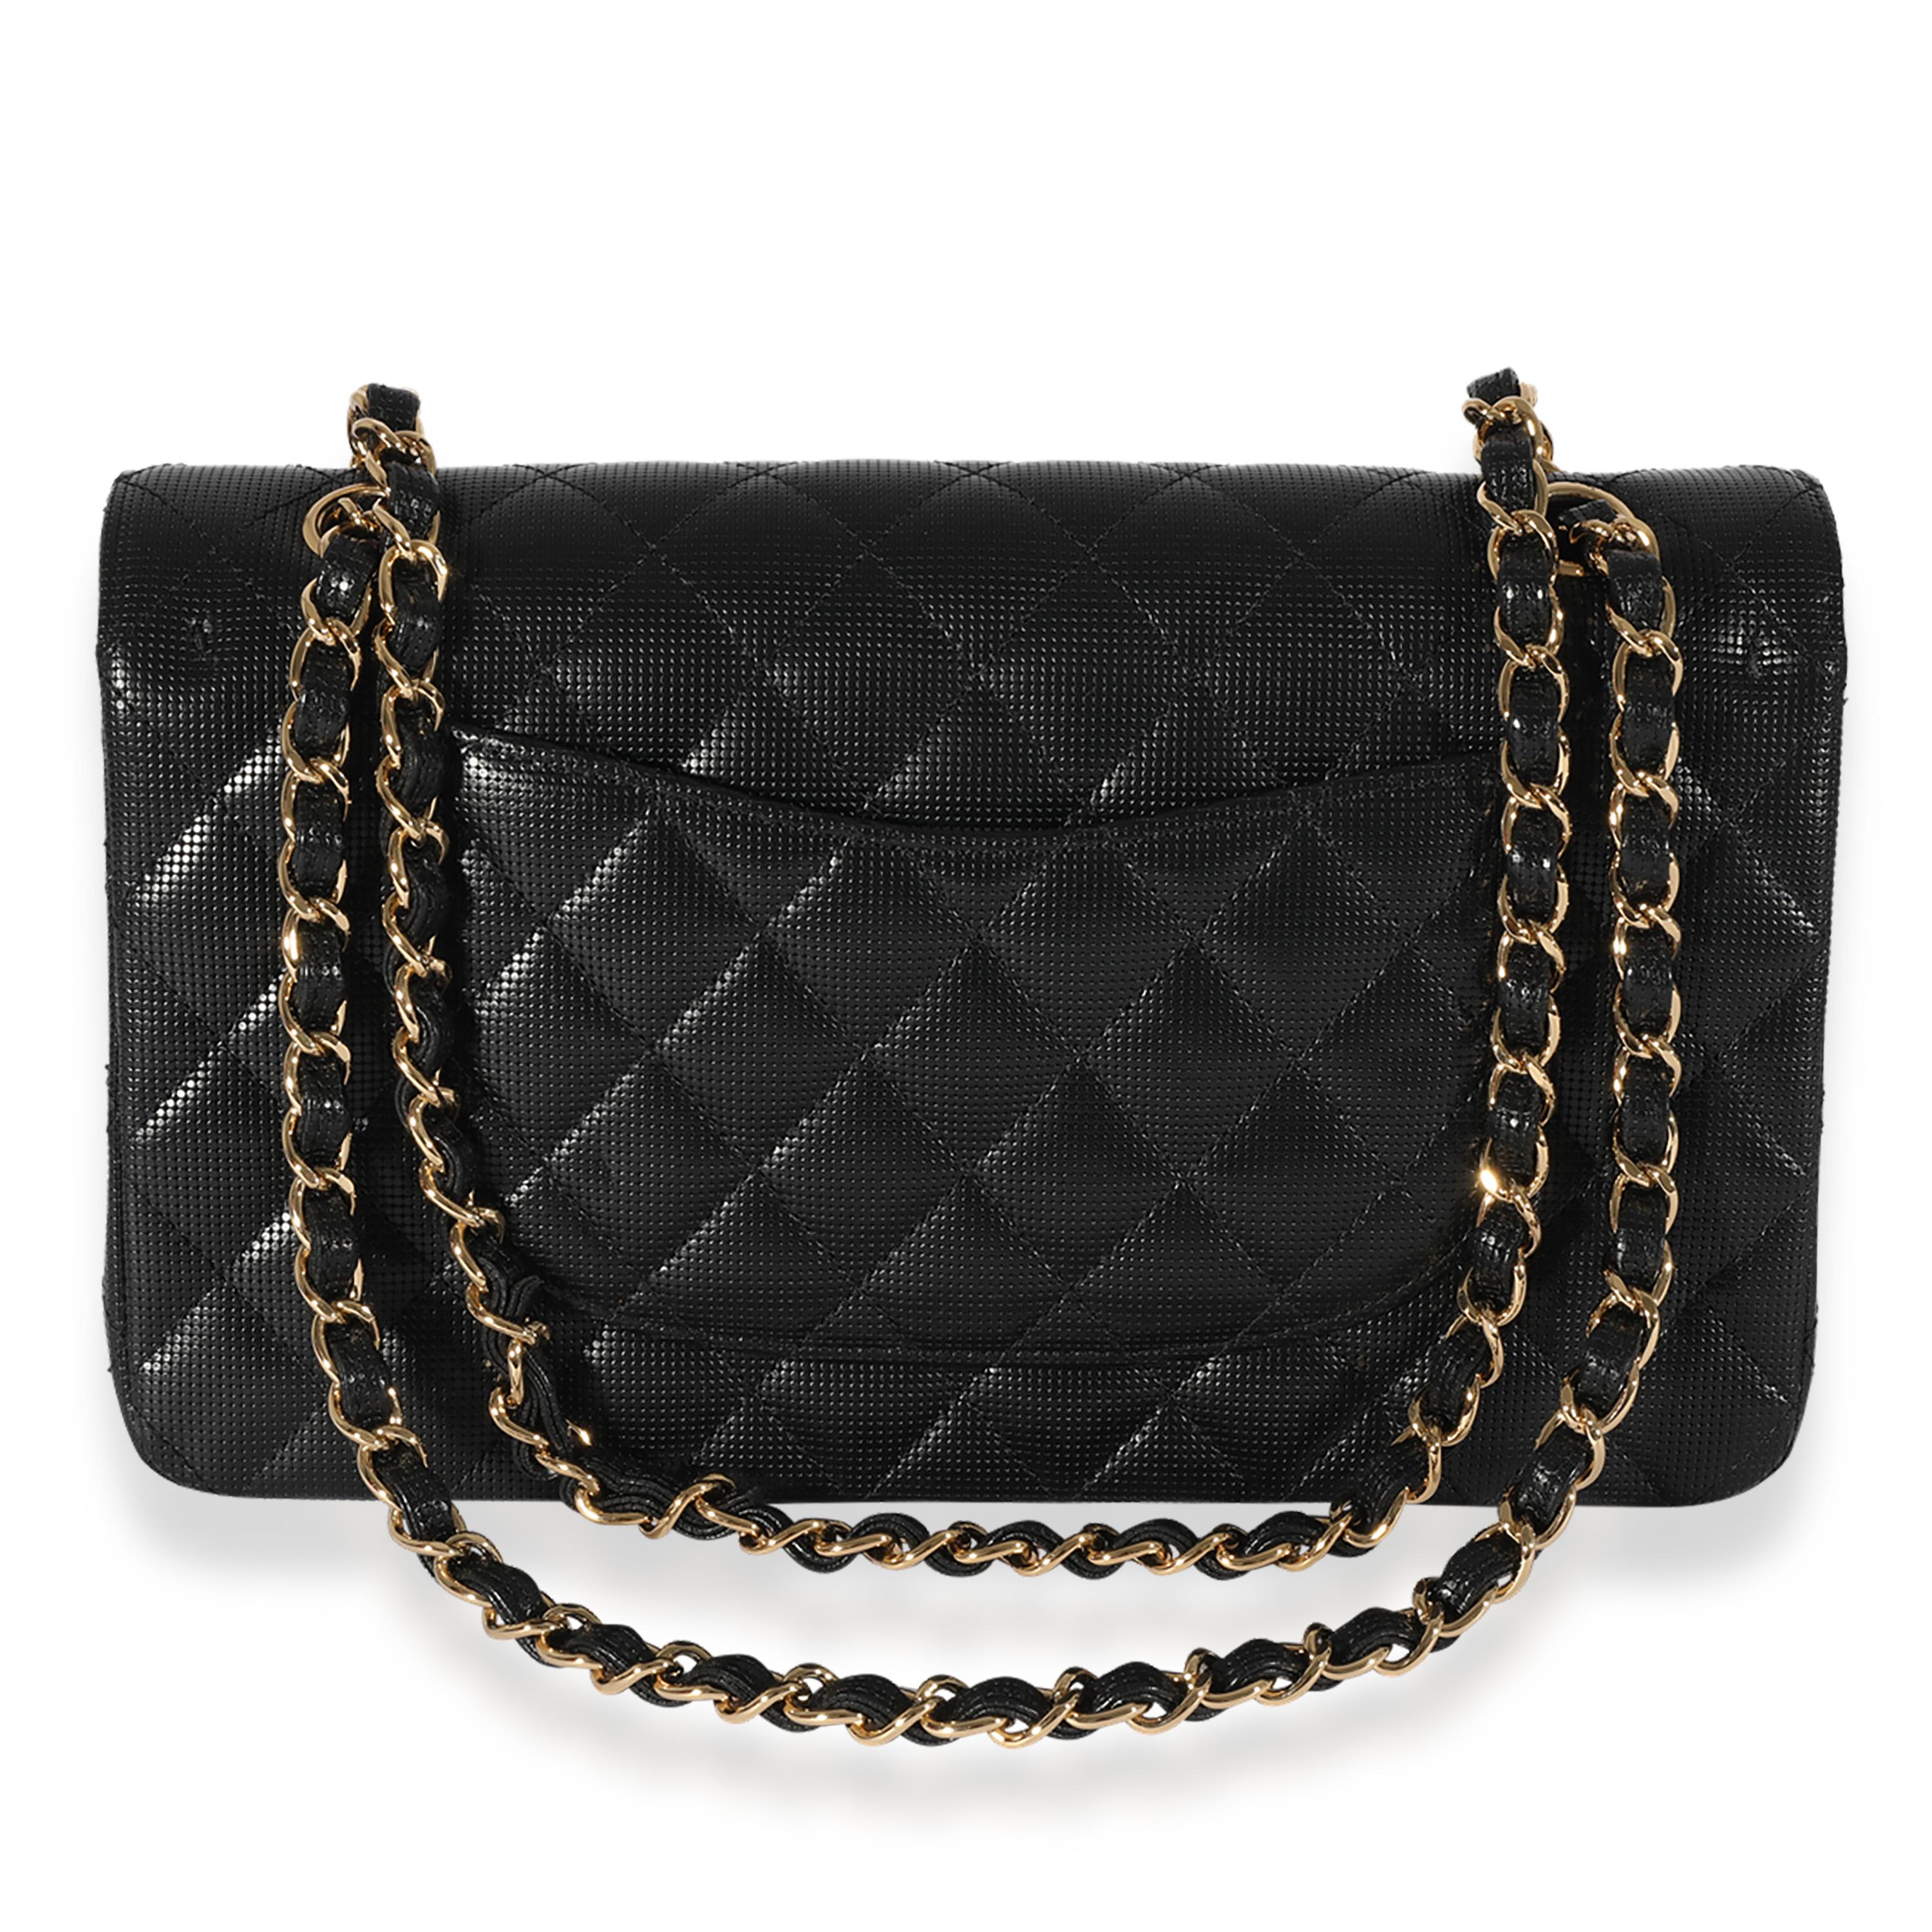 Chanel Black Quilted Perforated Lambskin Medium Classic Double Flap Bag im Zustand „Hervorragend“ im Angebot in New York, NY